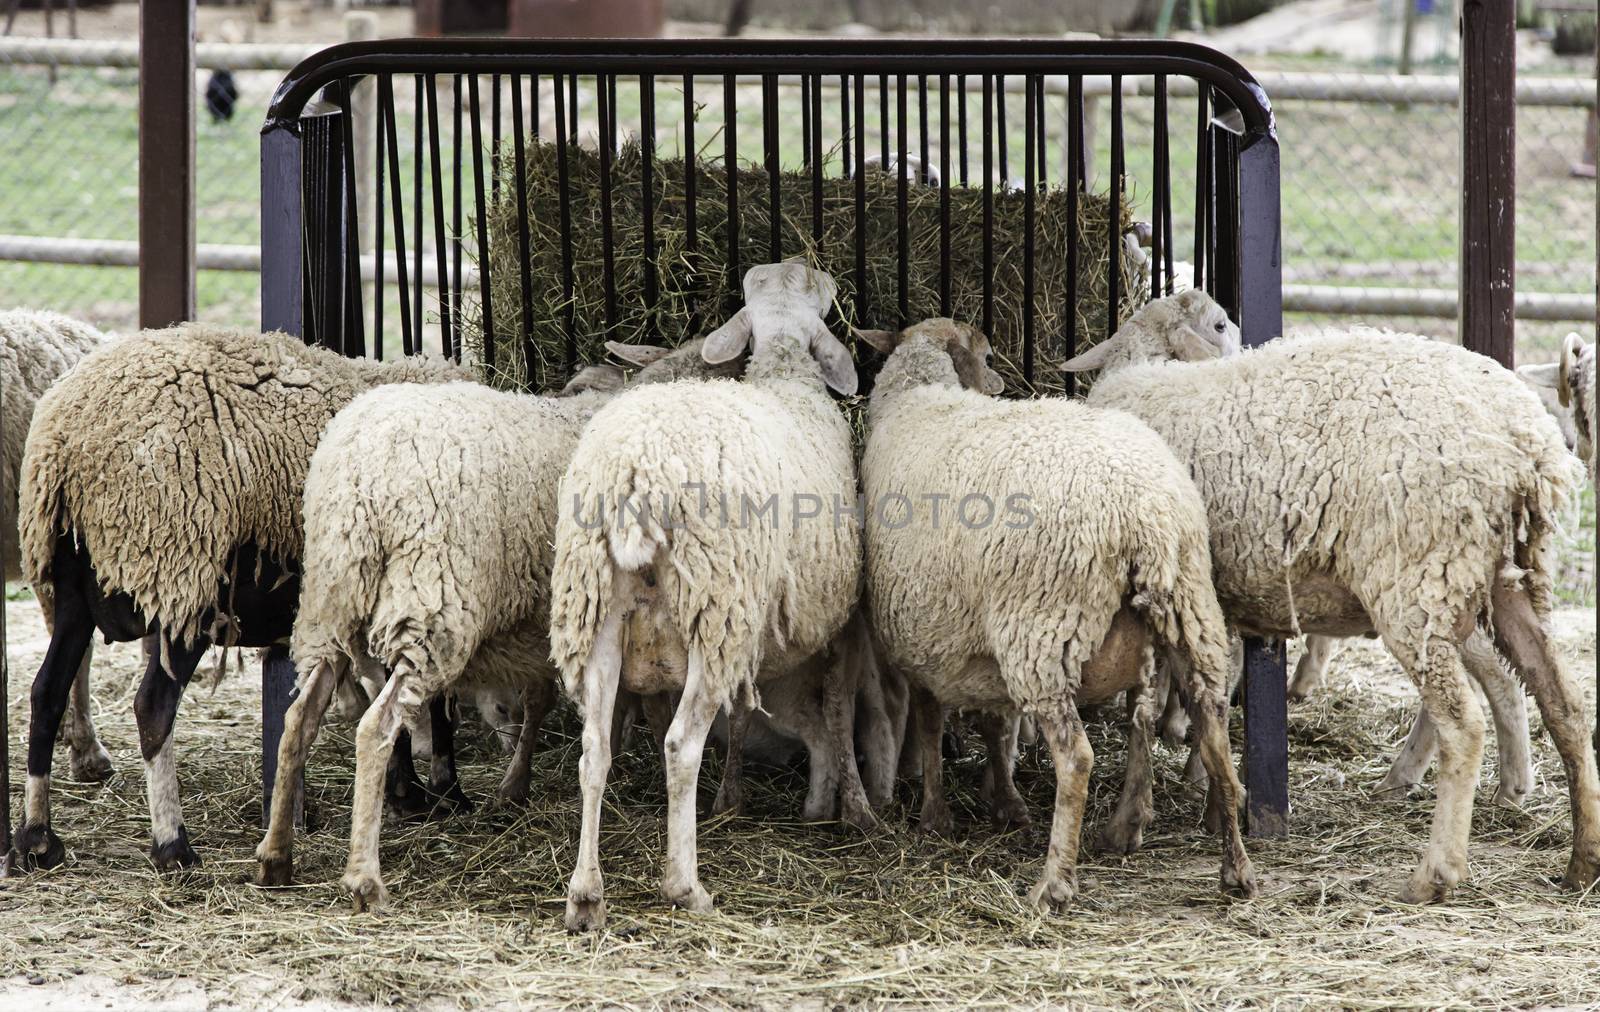 Sheep eating, detail of a sheep eating grass on a farm, wool and meat production